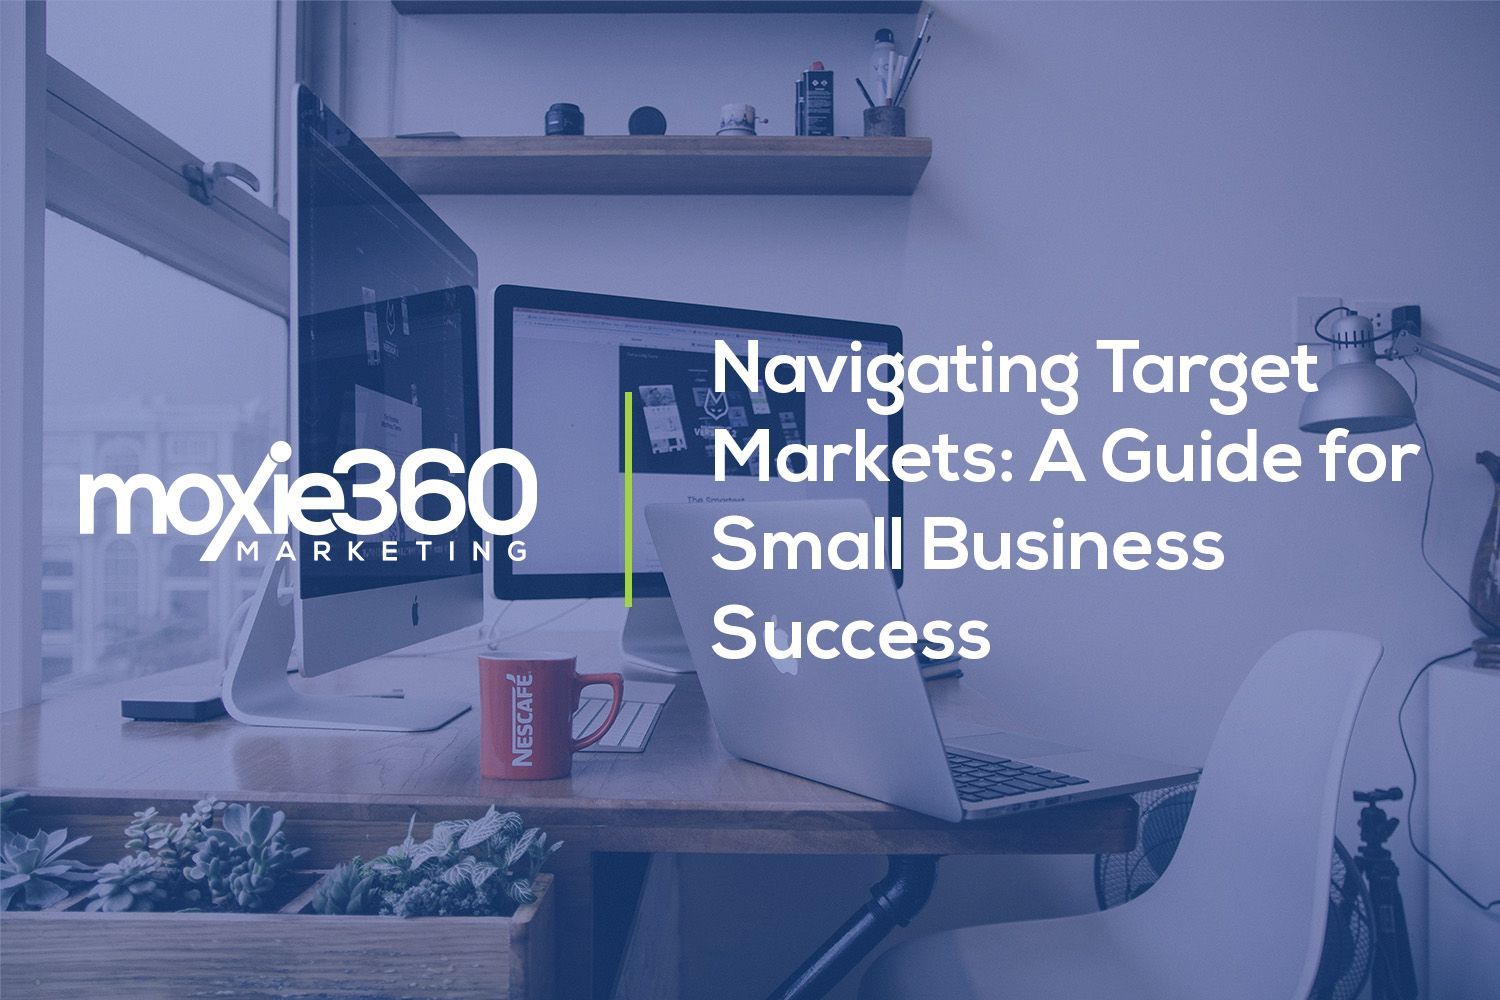 How to Choose the Right Target Market for My Small Business? | target market | moxie360marketing